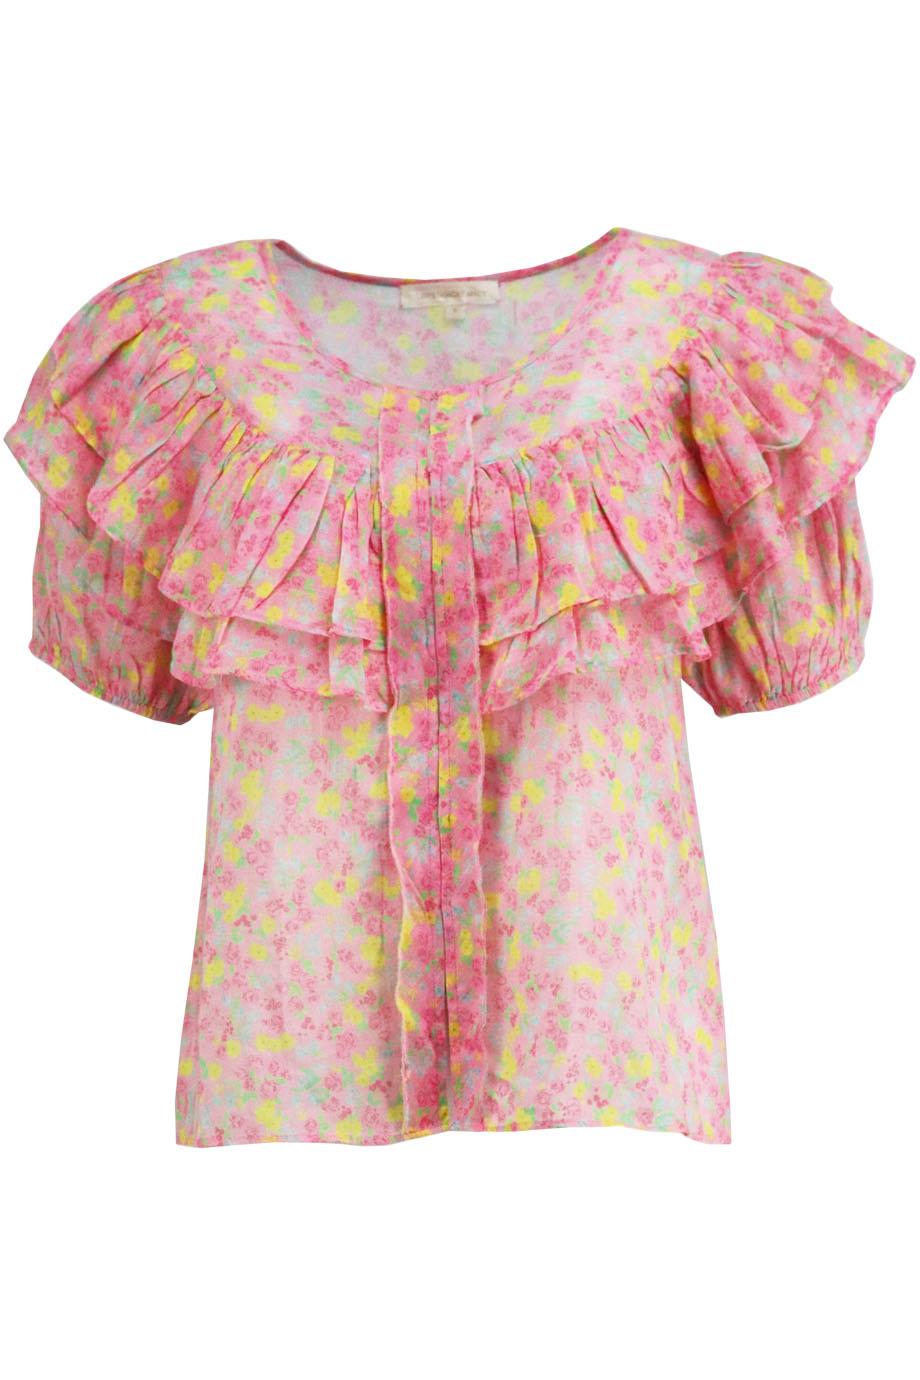 LOVESHACKFANCY RUFFLED FLORAL PRINT COTTON VOILE TOP SMALL